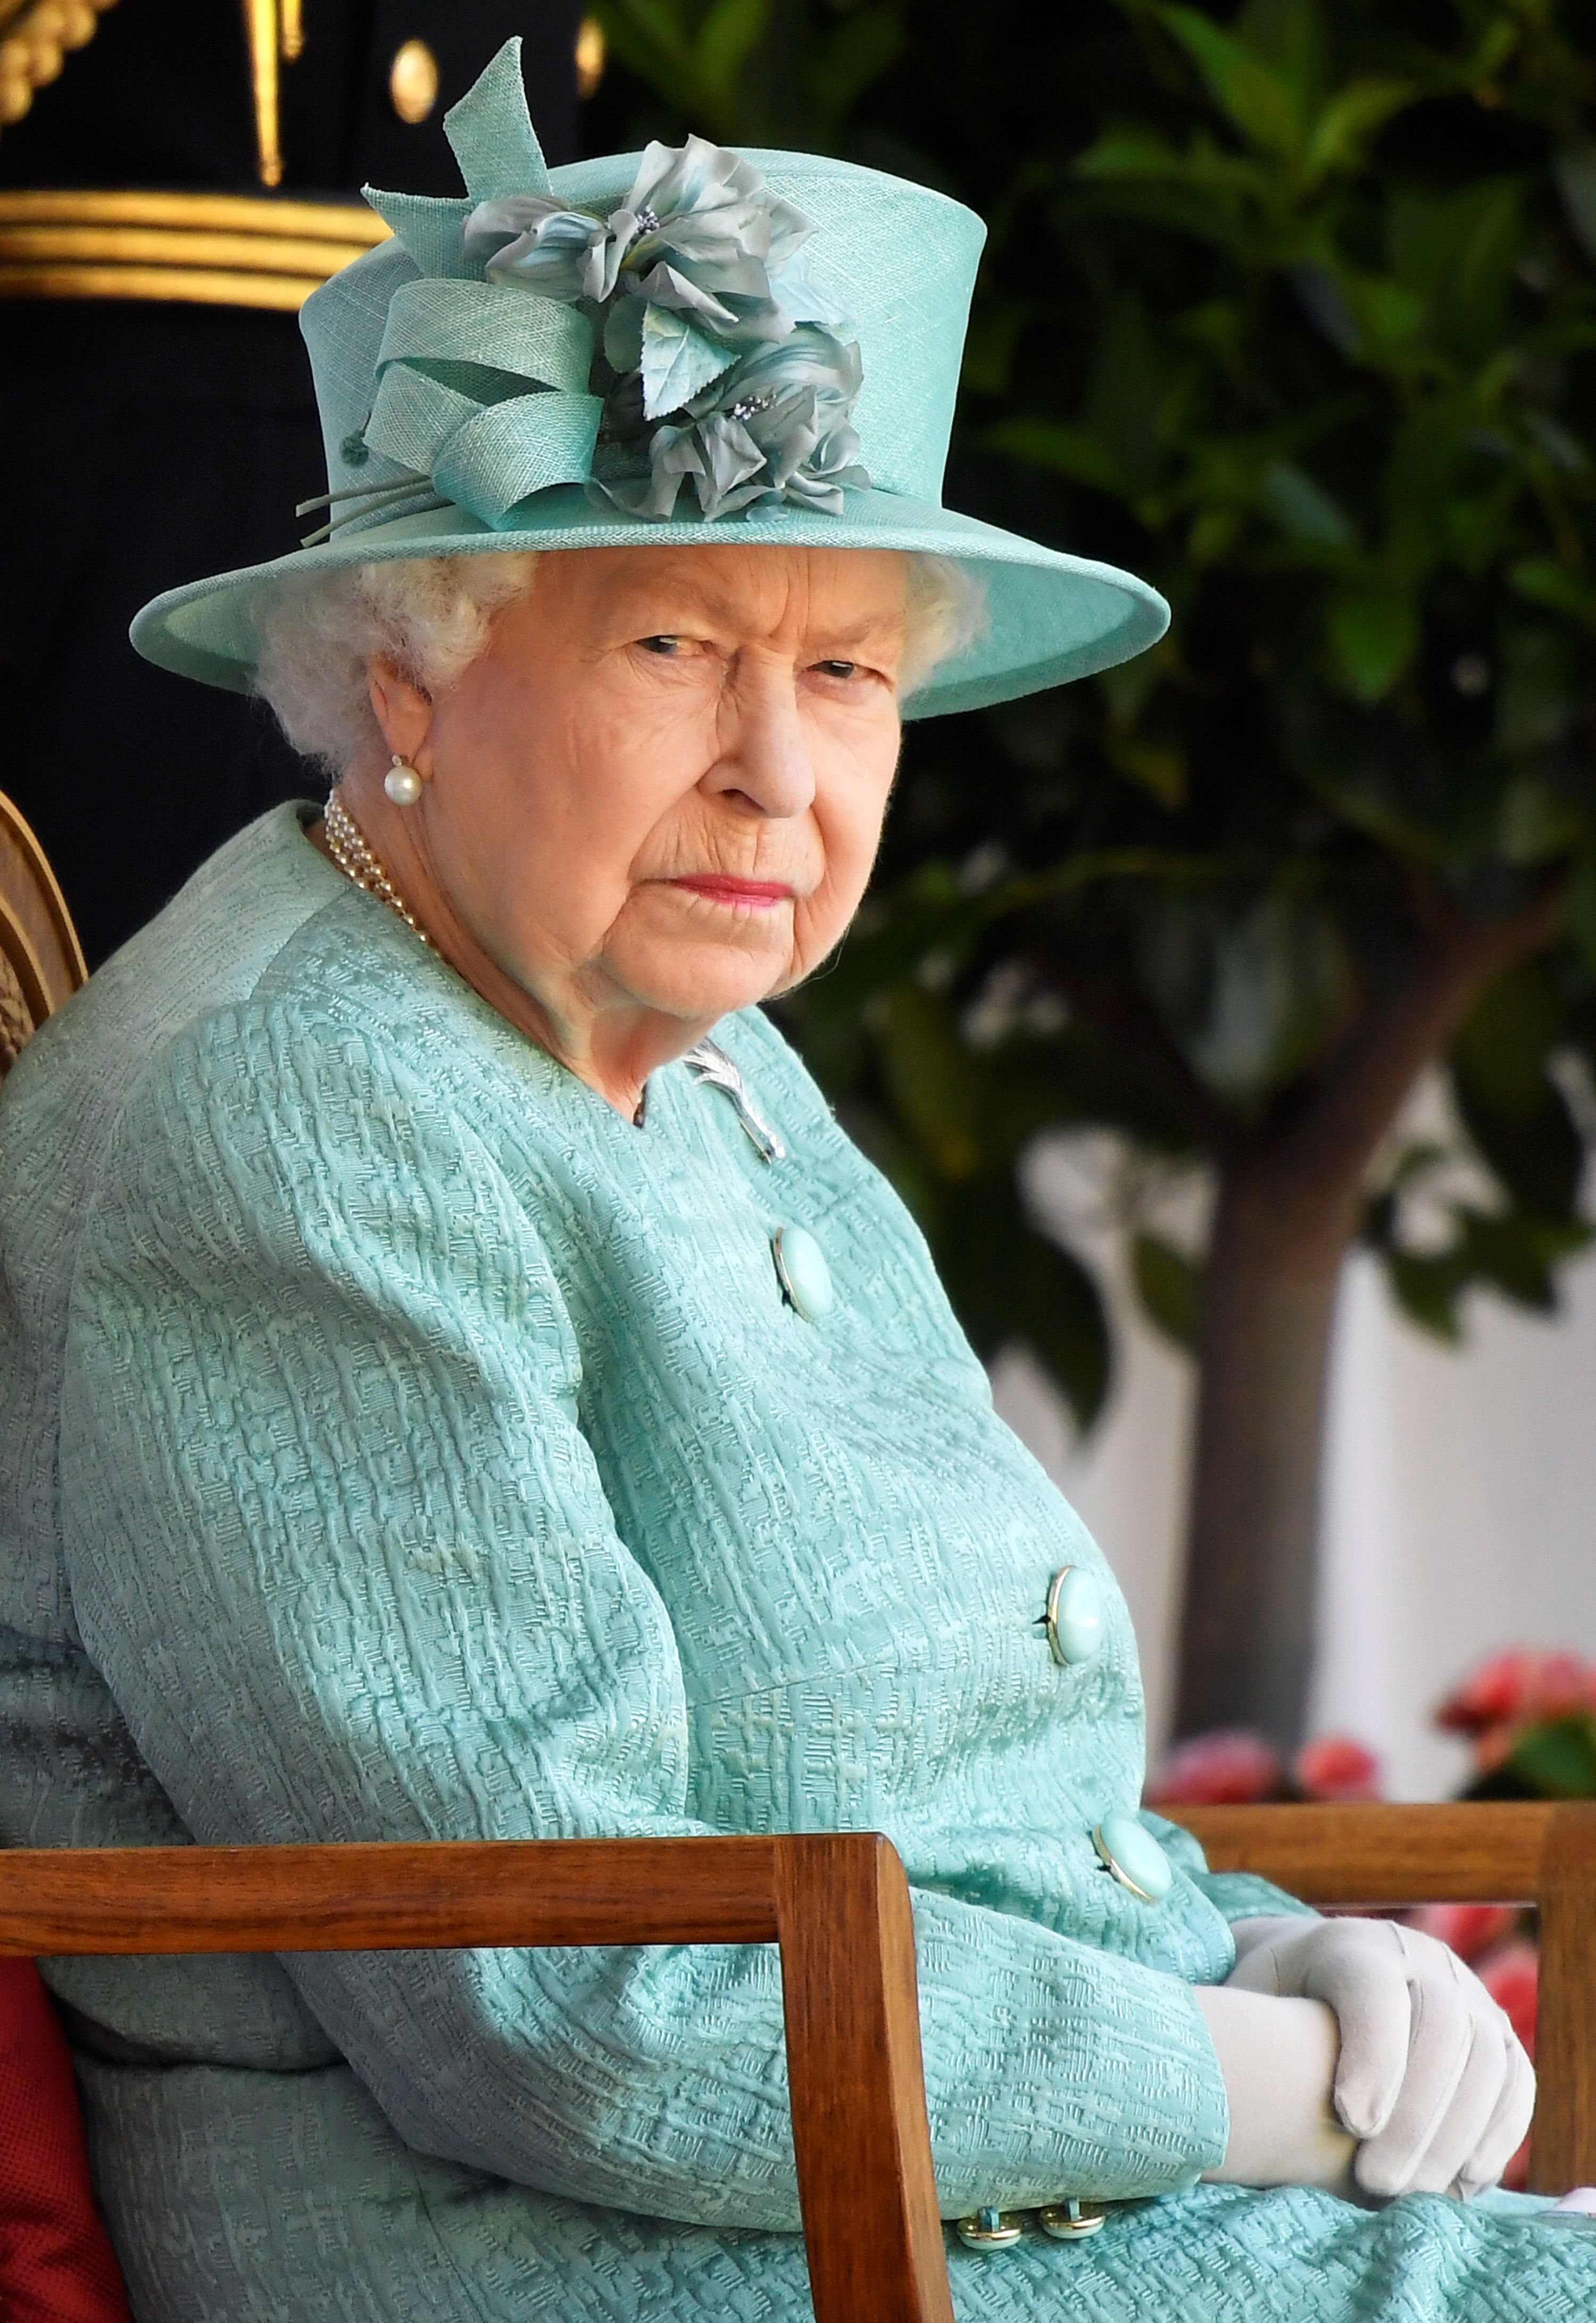 Queen Elizabeth II attends a ceremony to mark her official birthday at Windsor Castle on June 13, 2020 | Getty Images